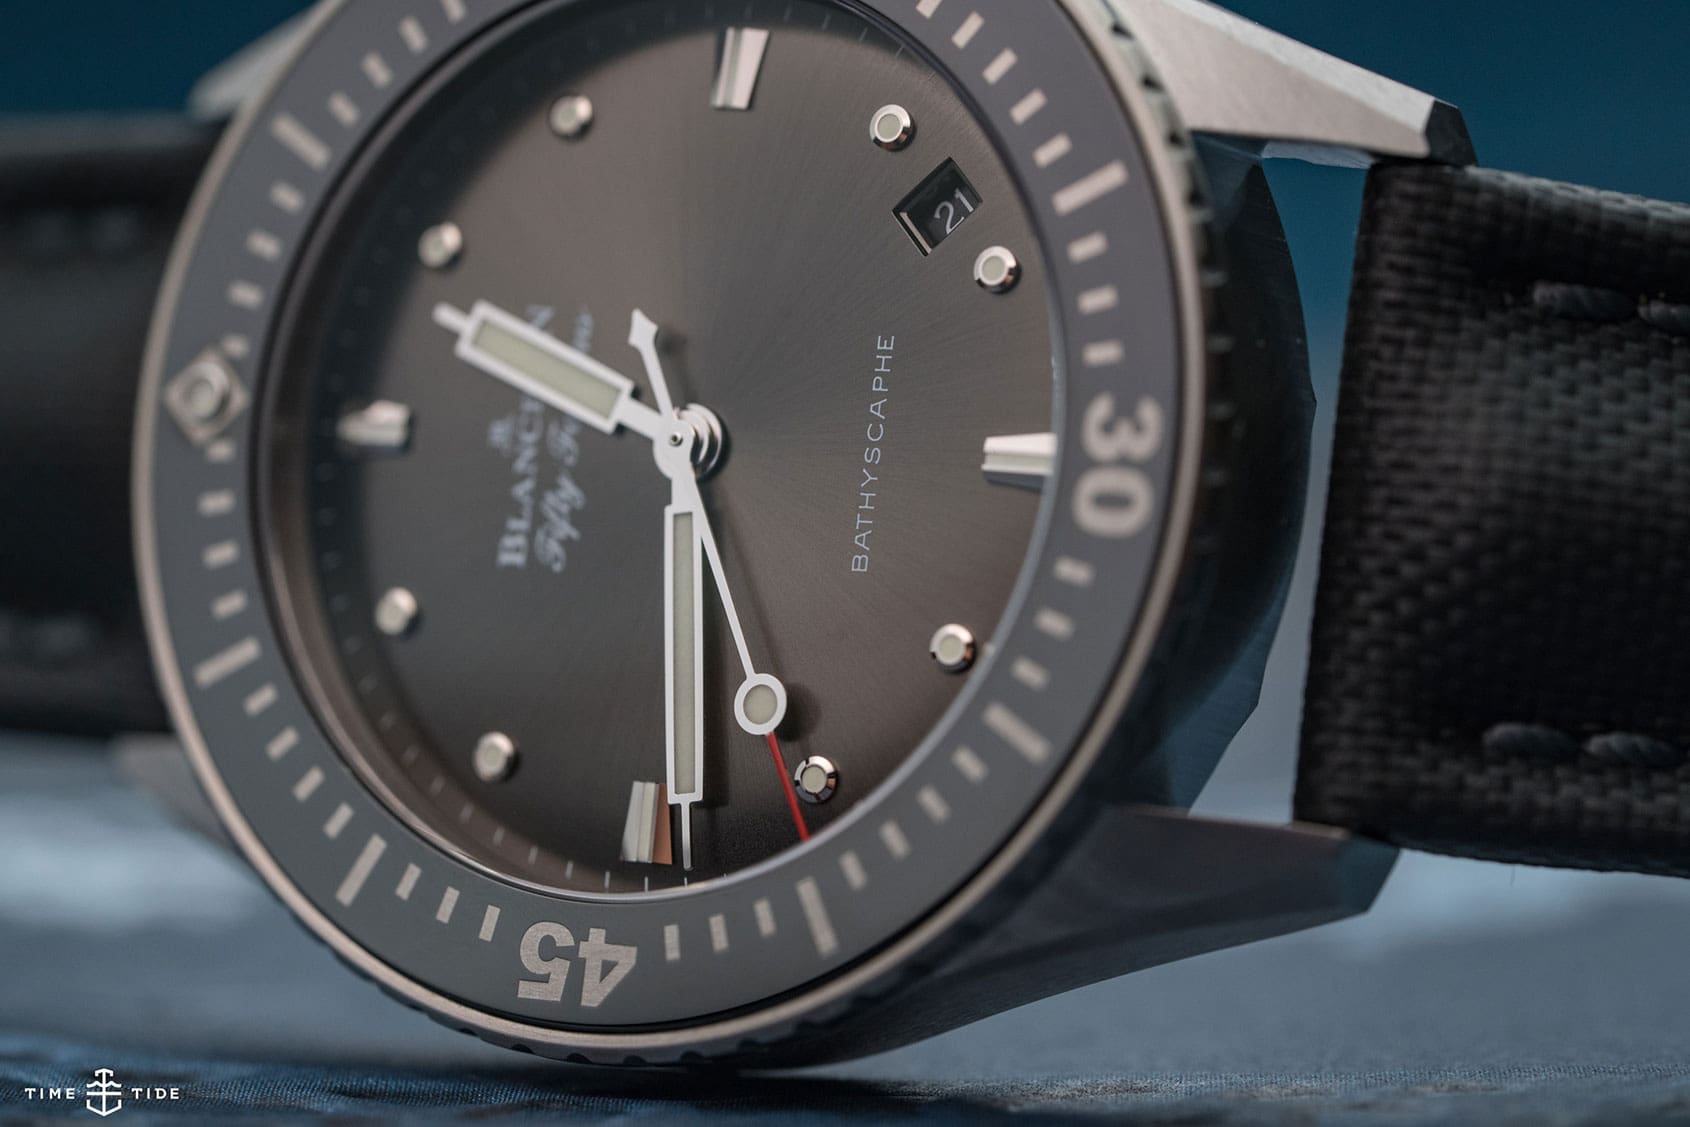 HANDS-ON: Return of the reasonably sized diver – the Blancpain Fifty Fathoms Bathyscaphe 38mm